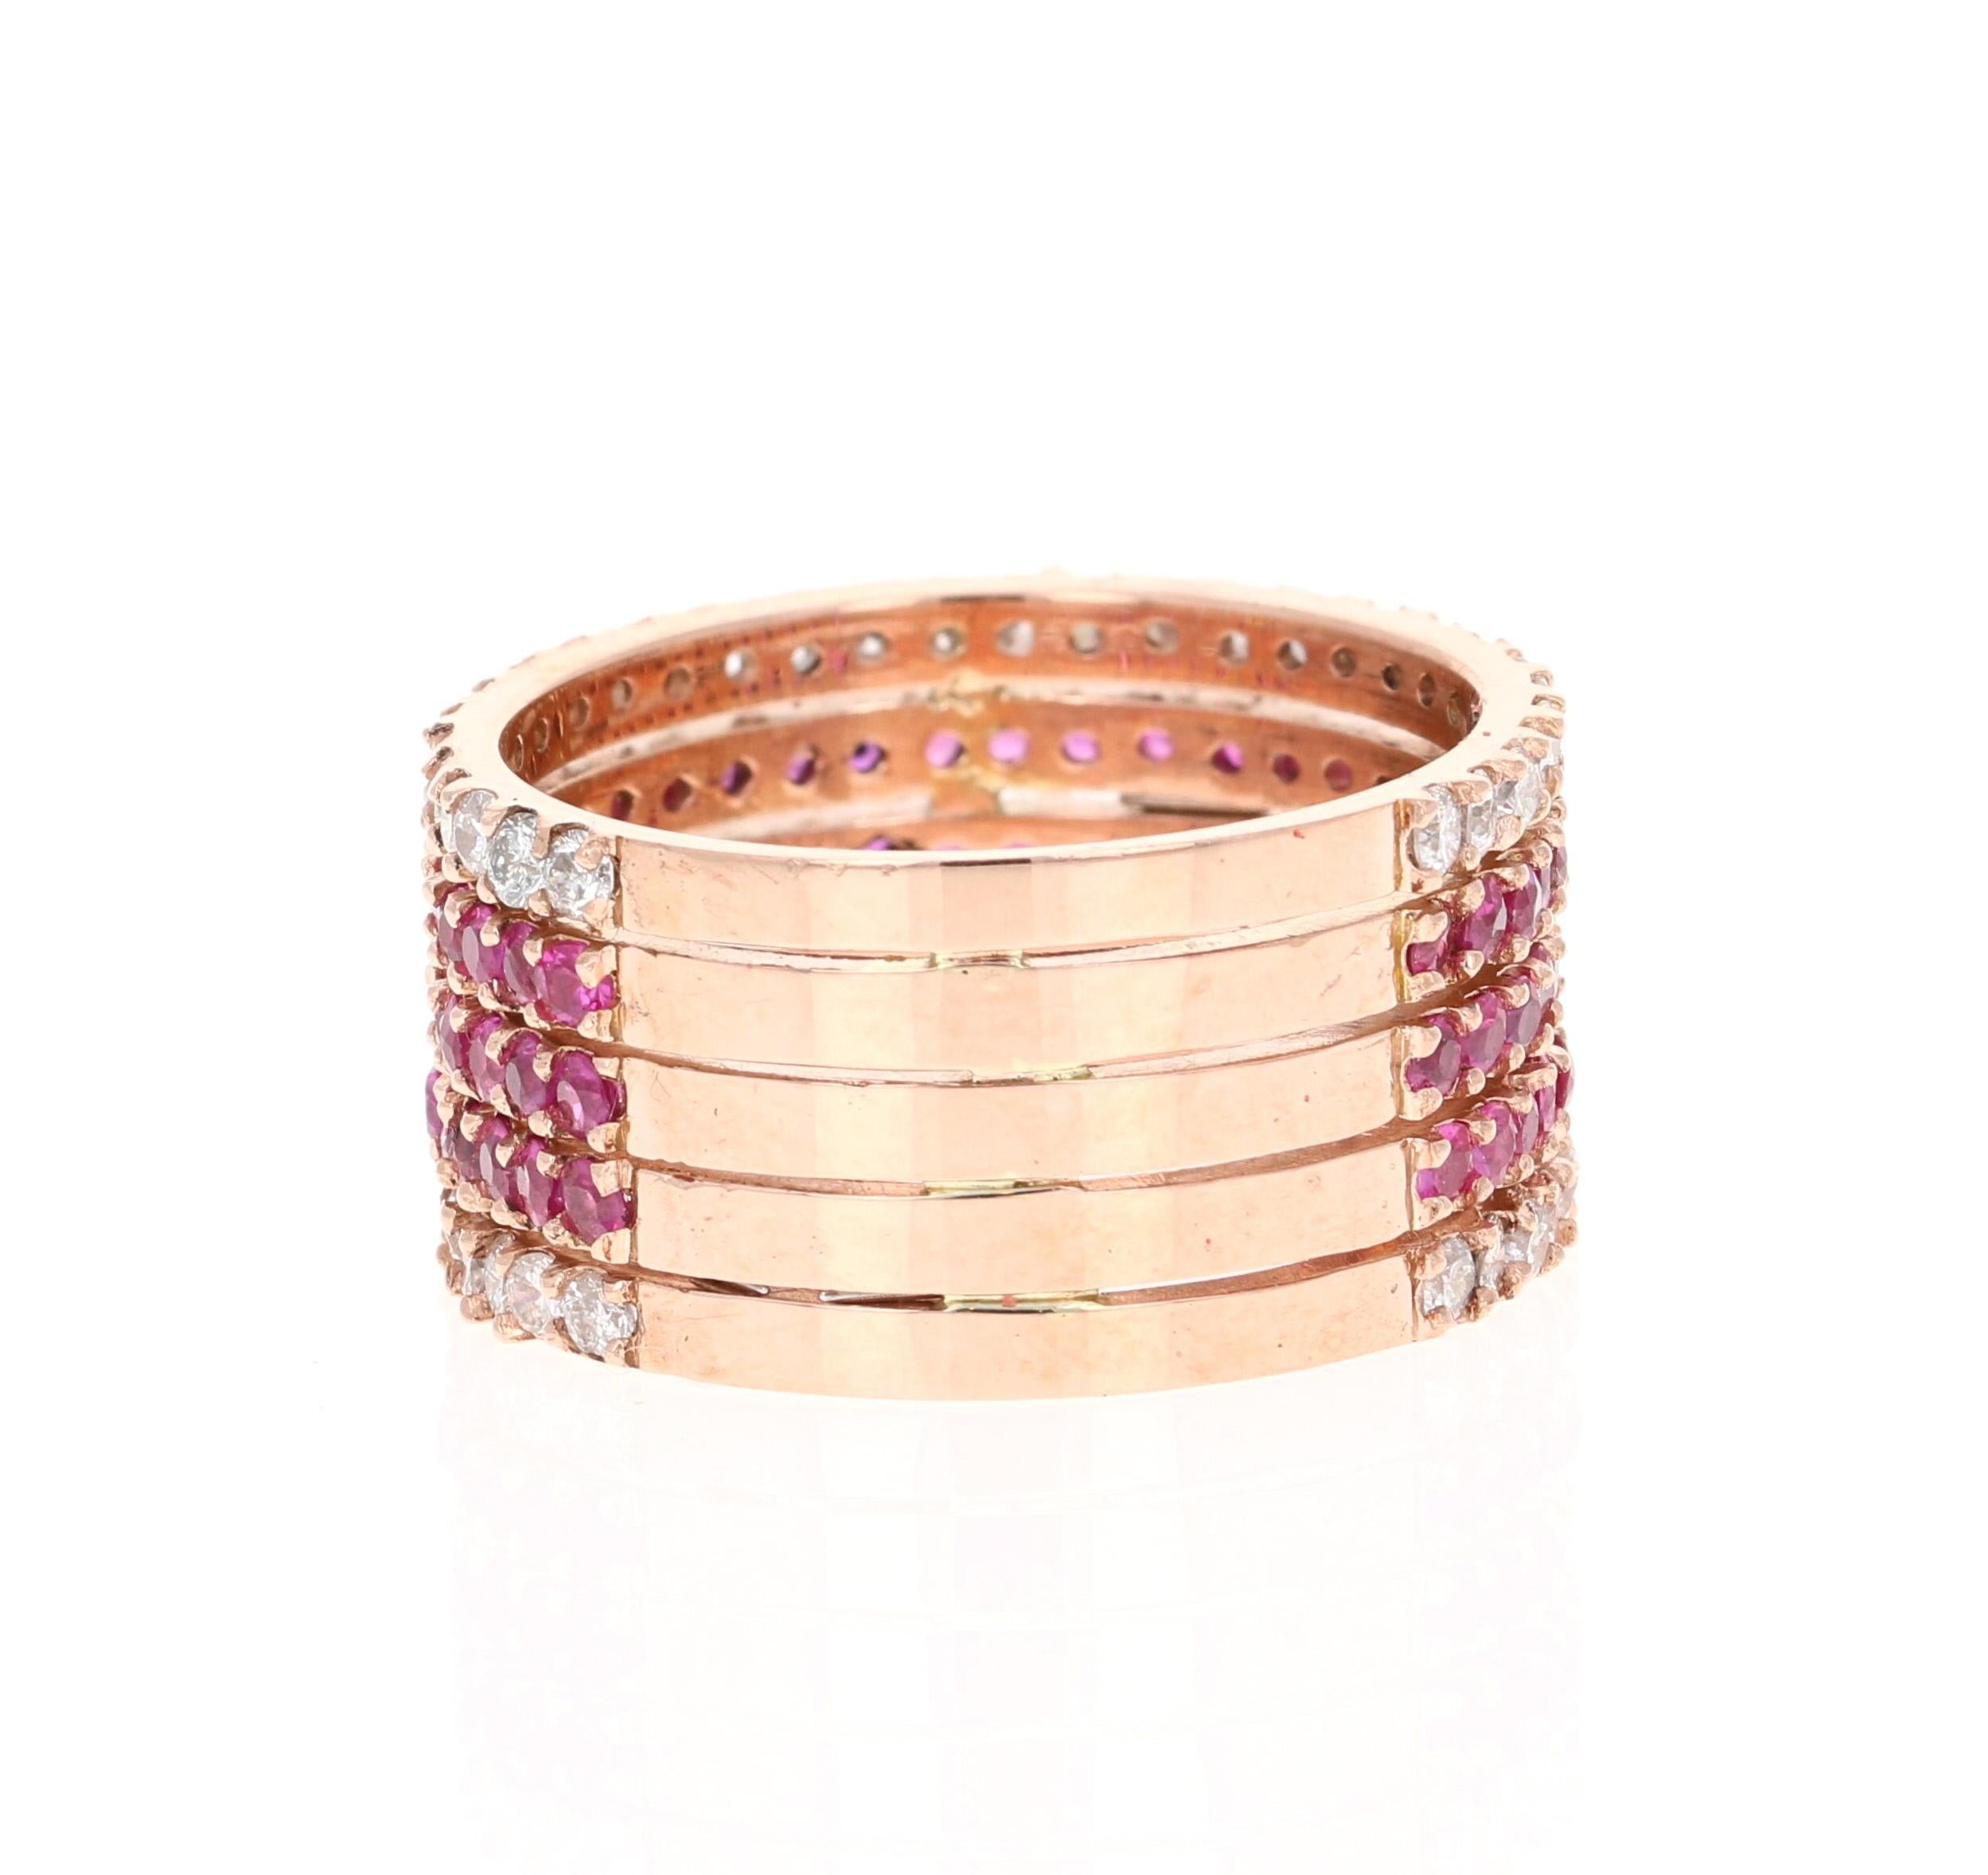 Contemporary 3.09 Carat Pink Sapphire and Diamond Rose Gold Cocktail Ring For Sale